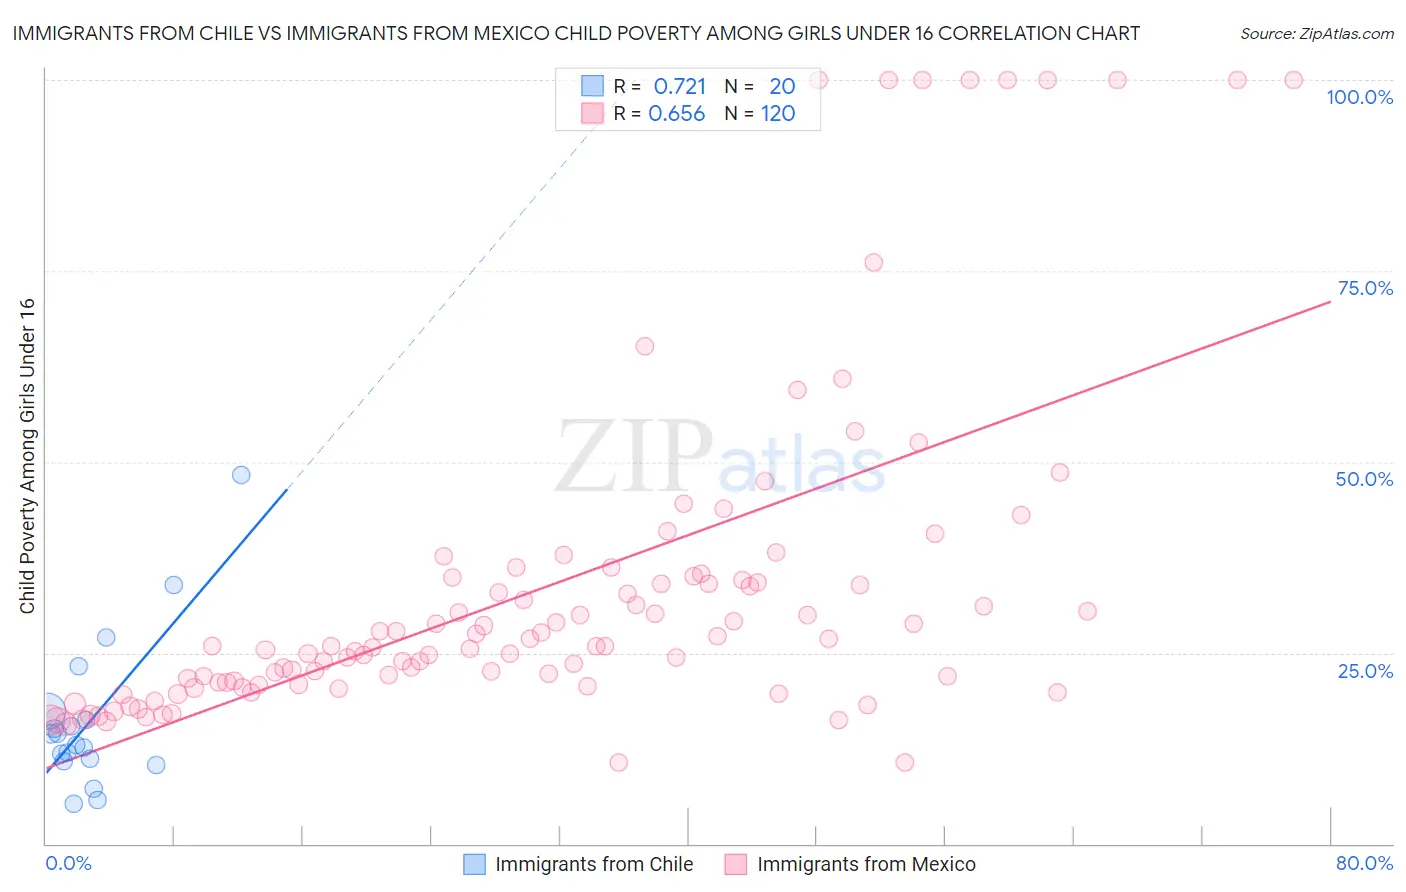 Immigrants from Chile vs Immigrants from Mexico Child Poverty Among Girls Under 16